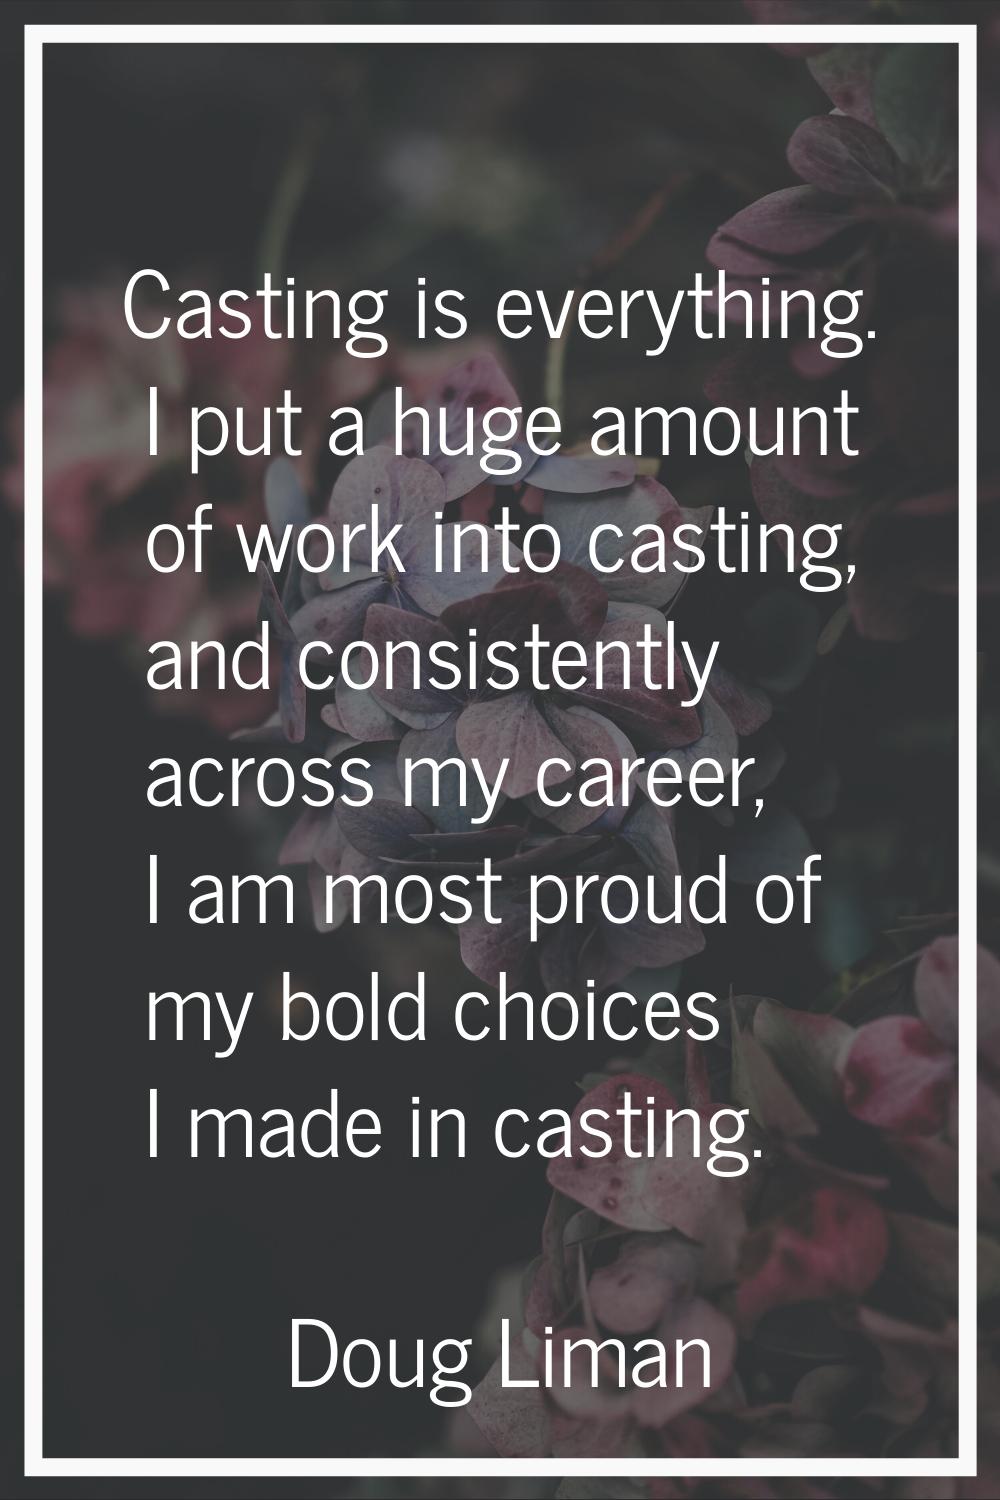 Casting is everything. I put a huge amount of work into casting, and consistently across my career,